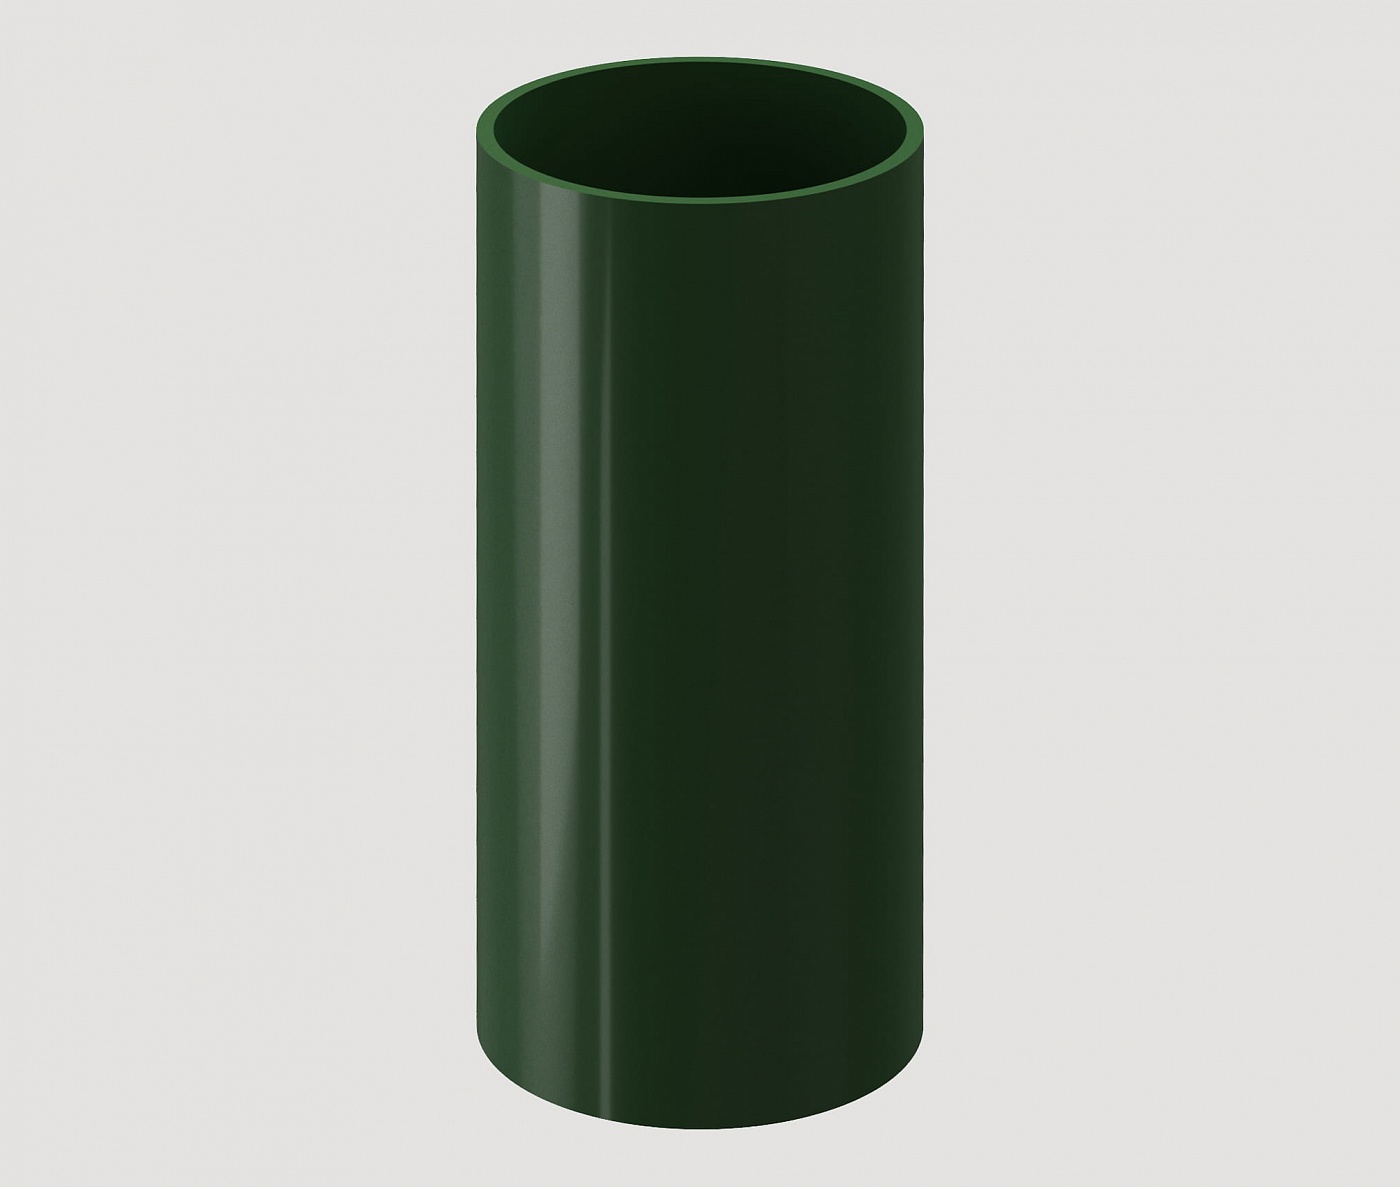 Водостоки - STANDARD SERIES Green RAL 6005 - Elements of the drainage system - Pipe 3m